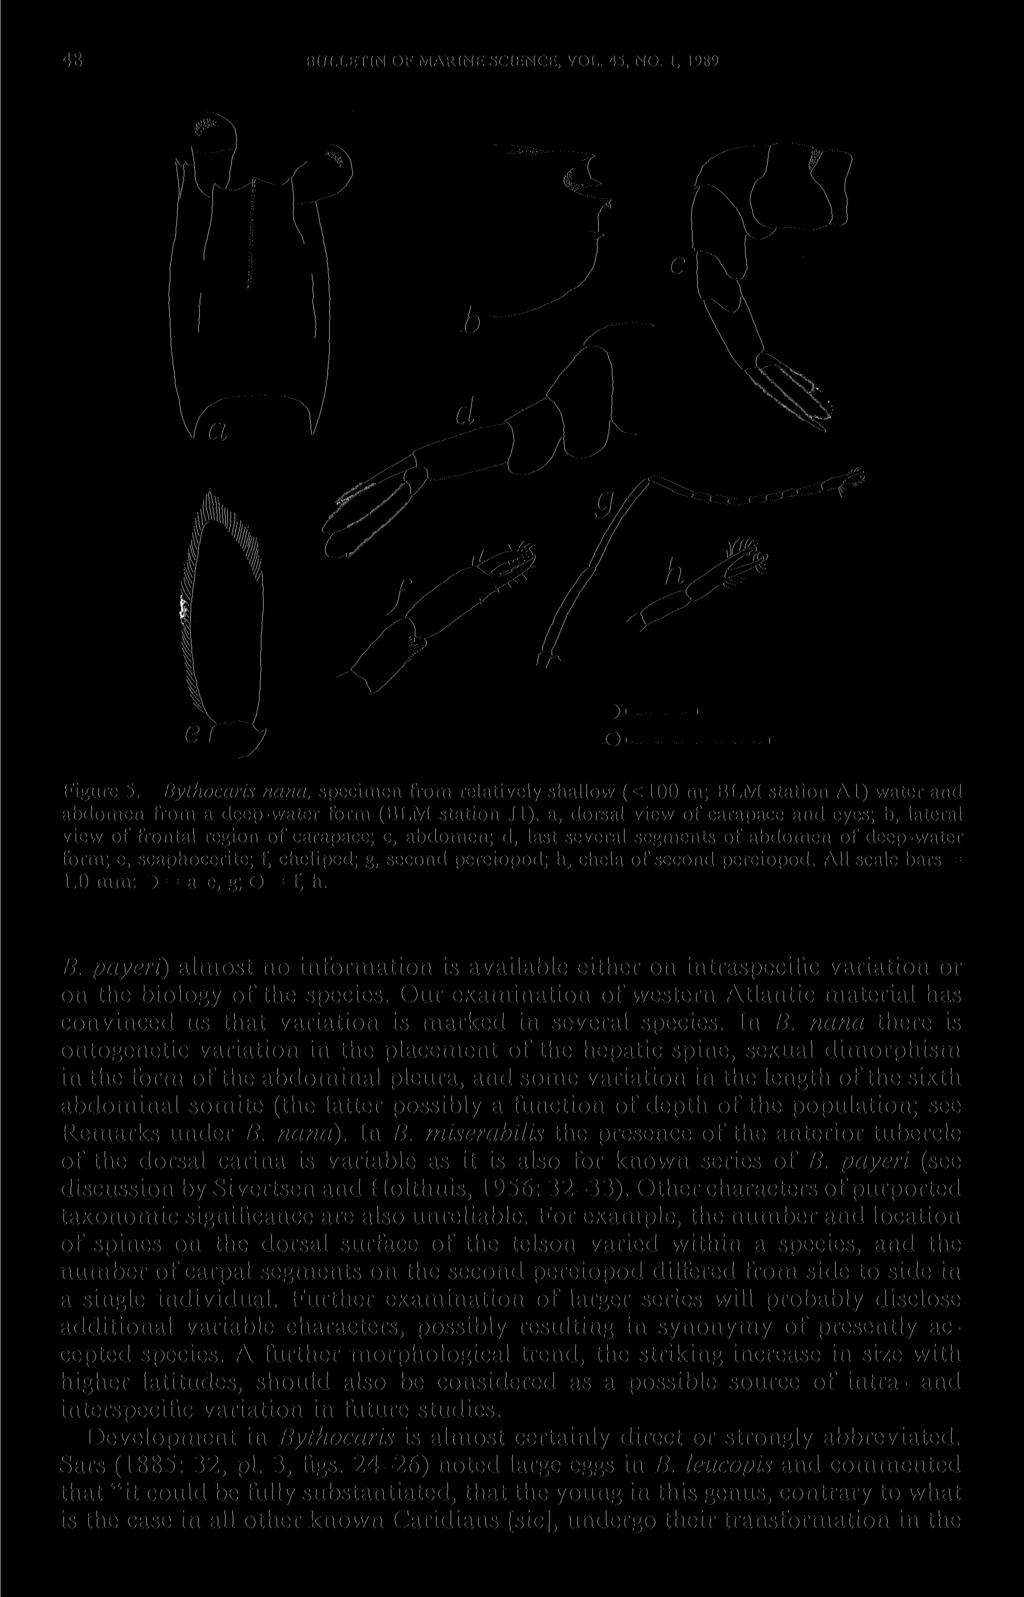 48 BULLETIN OF MARINE SCIENCE, VOL. 45, NO. 1, 1989 Figure 5. Bythocaris nana, specimen from relatively shallow (< 100 m; BLM station Al) water and abdomen from a deep-water form (BLM station Jl).